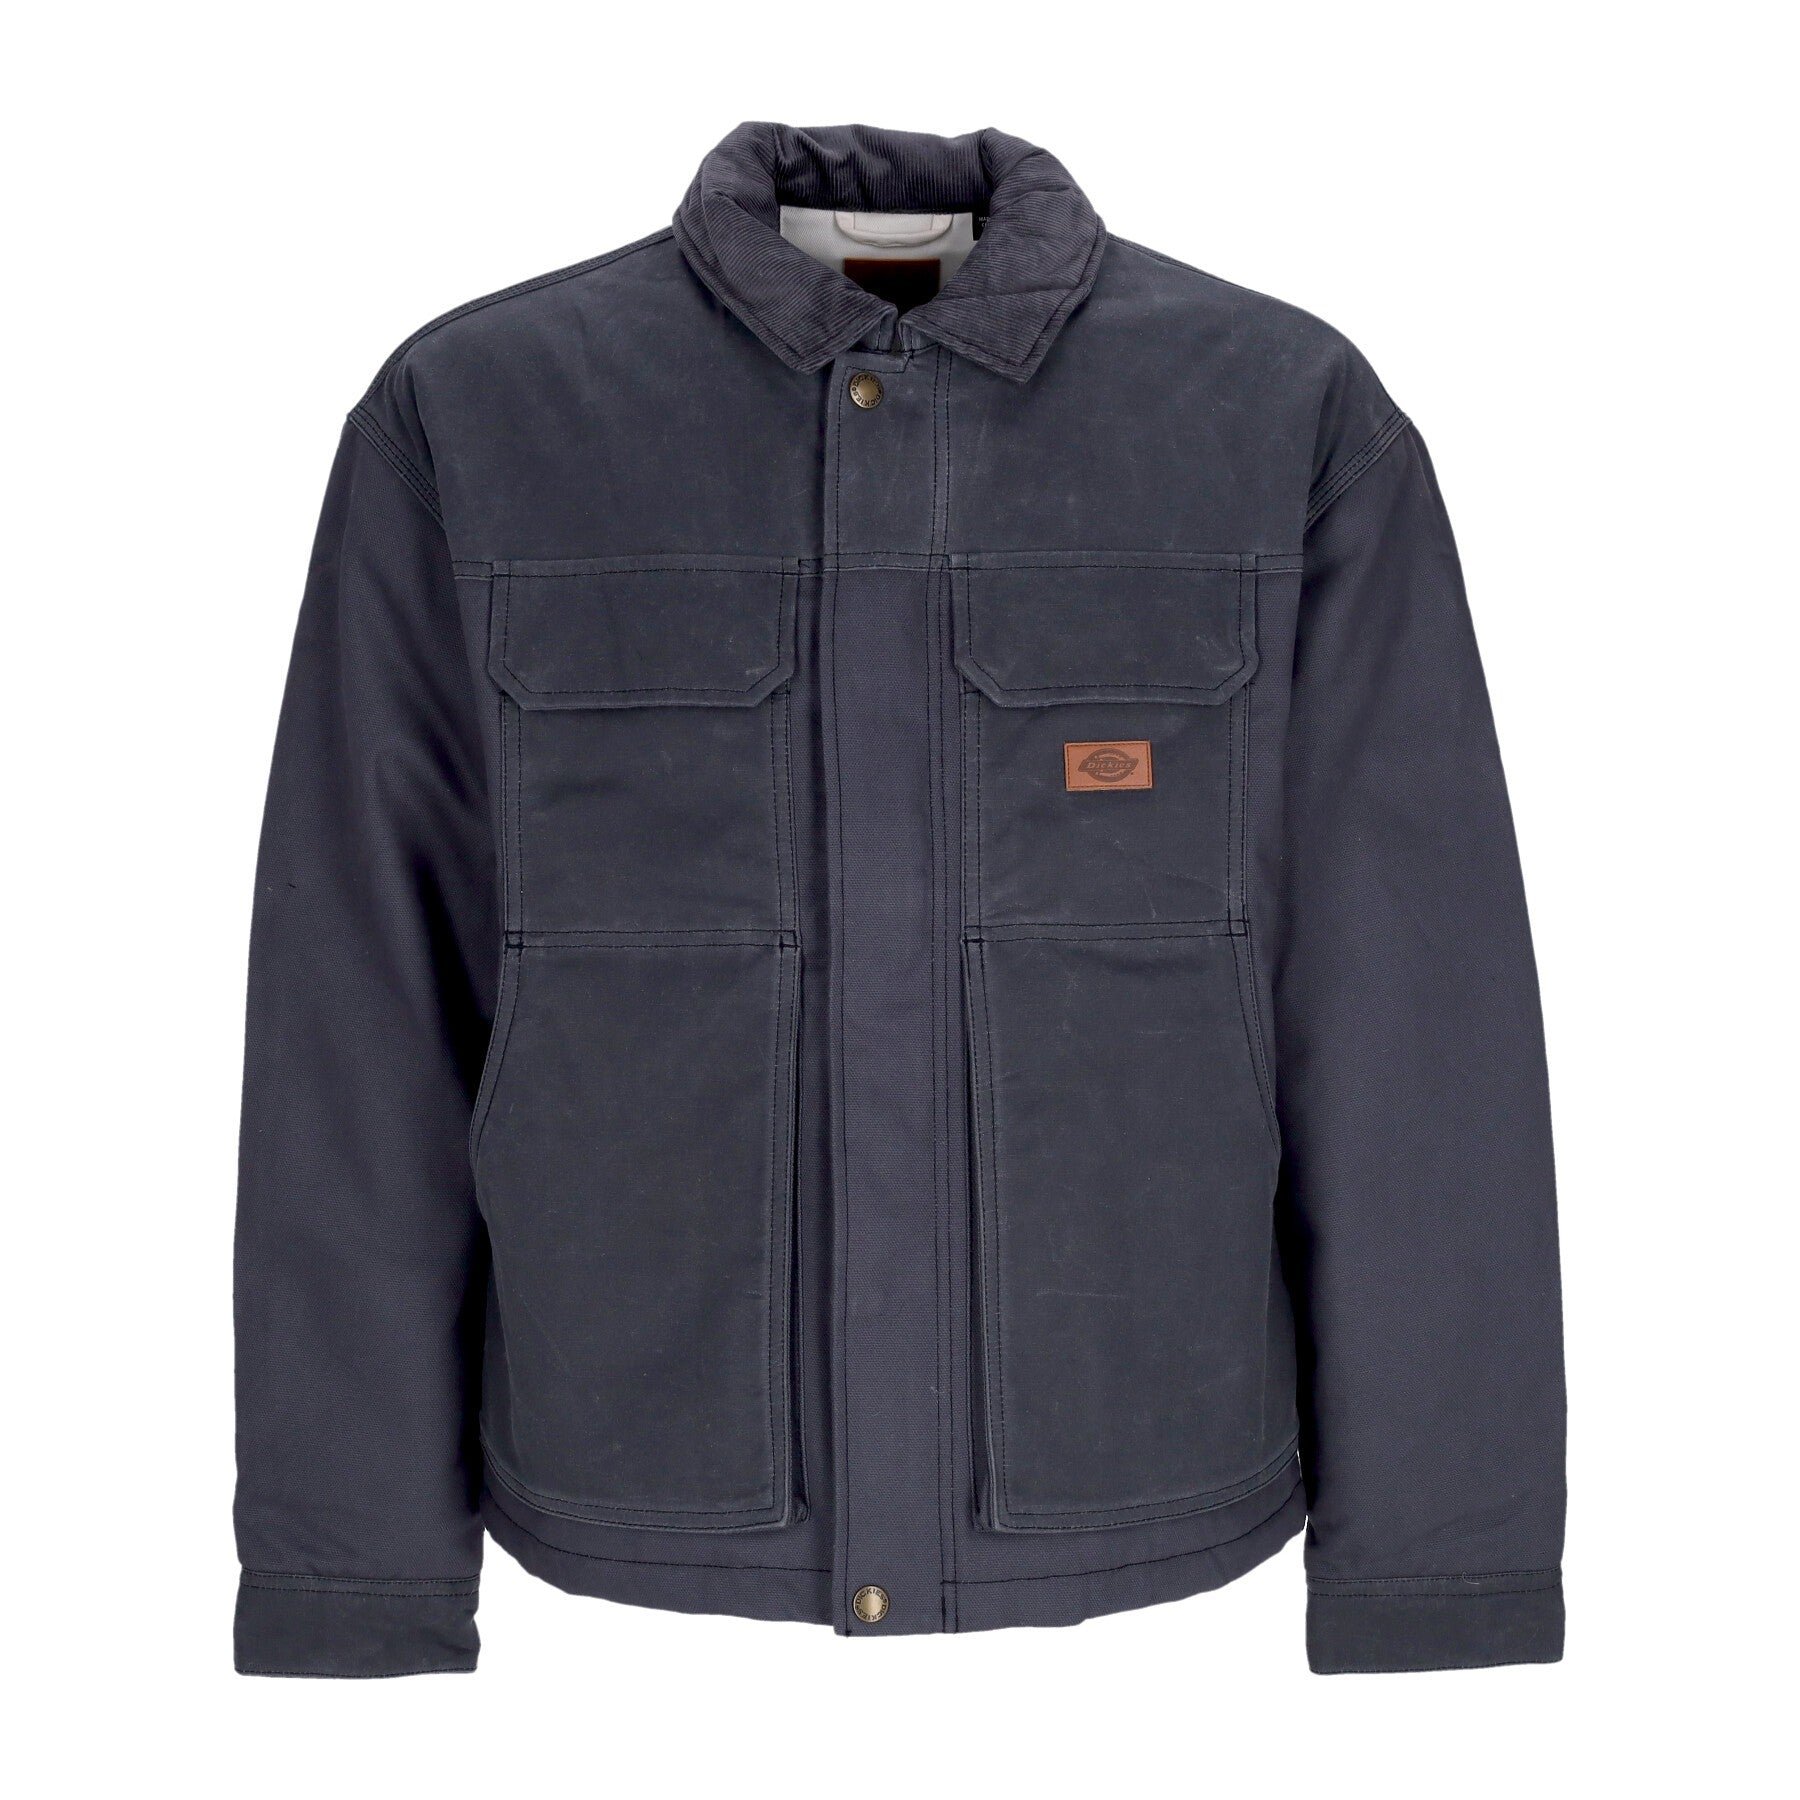 Dickies, Giubbotto Uomo Lucas Waxed Pocket Front Jacket, Charcoal Grey